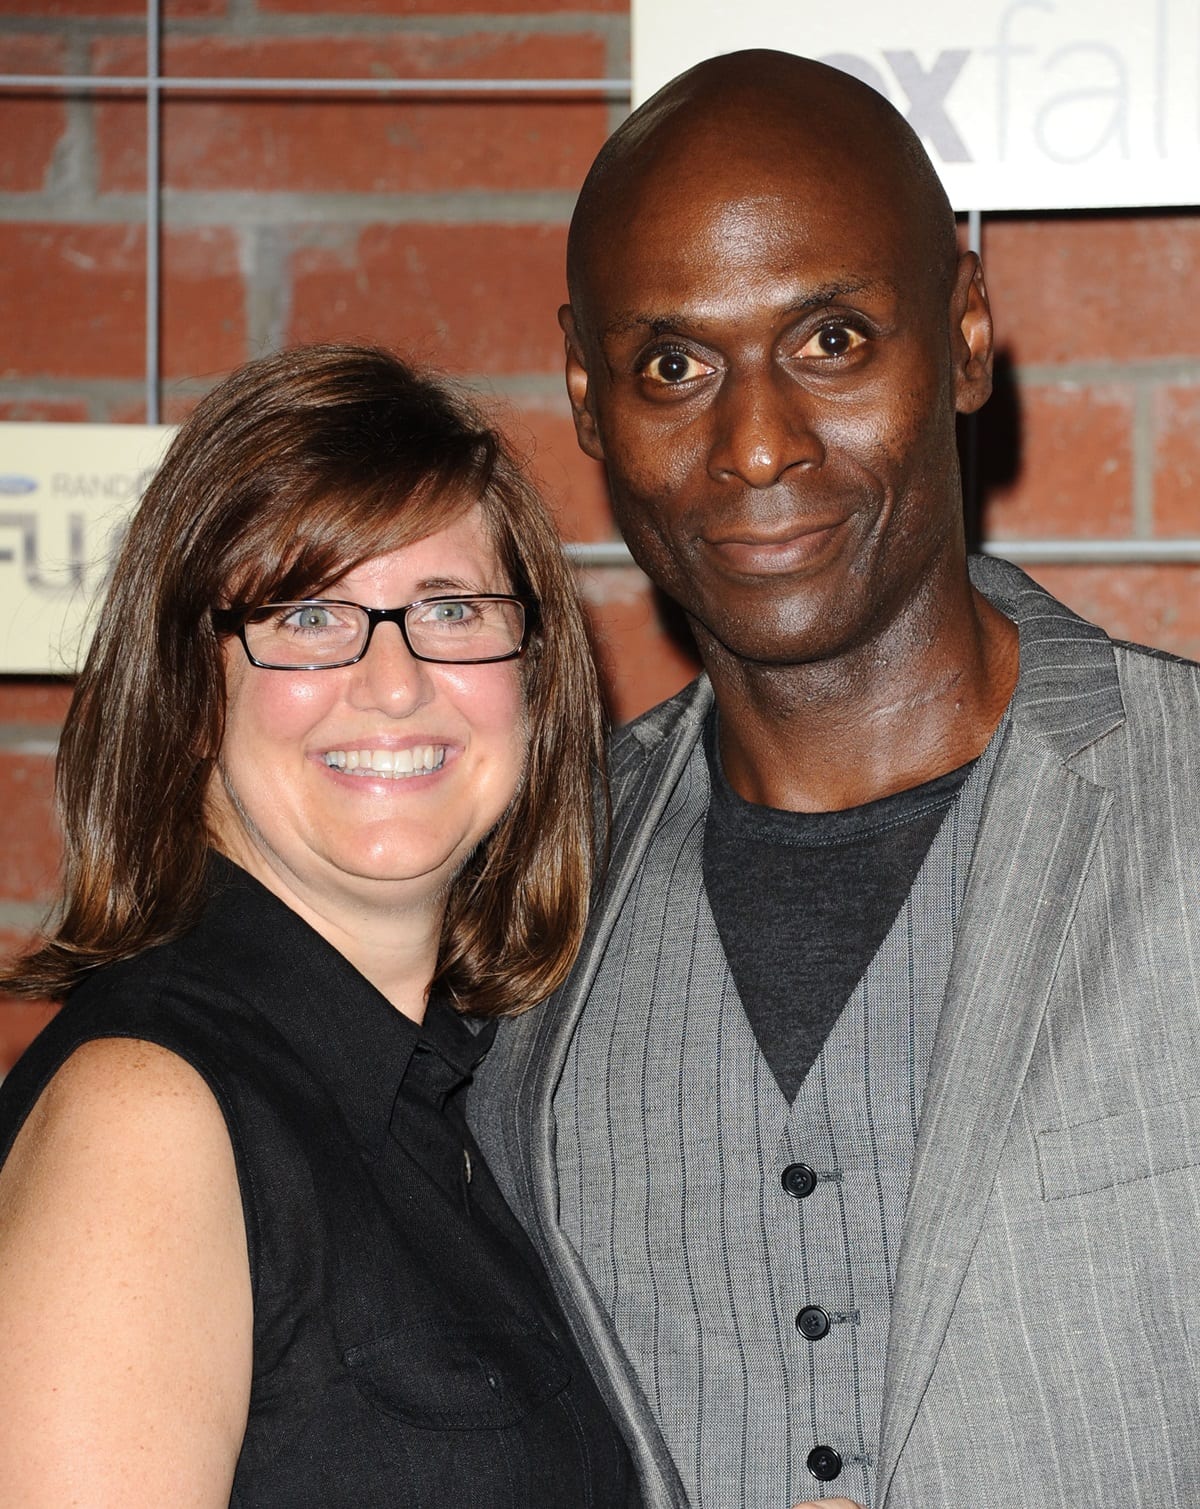 In 1999, while working on a play at the Guthrie Theater in Minneapolis, Minnesota, Lance Reddick met his future wife, Stephanie, an employee at the theater